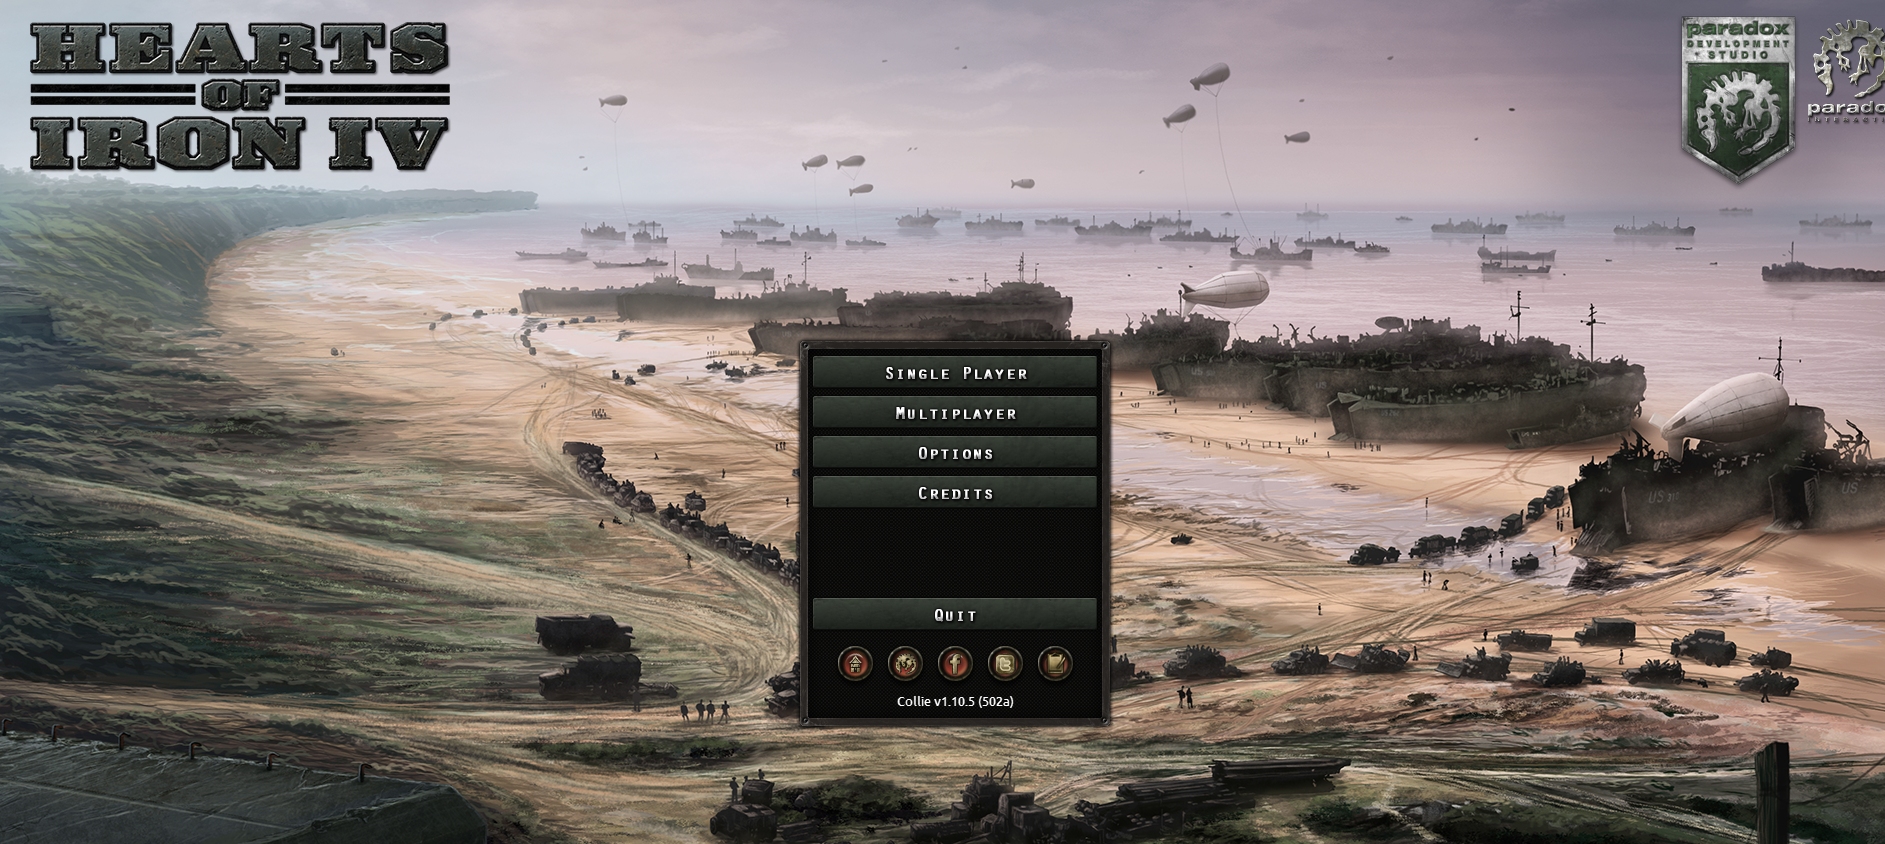 playing cracked hoi4 multiplayer